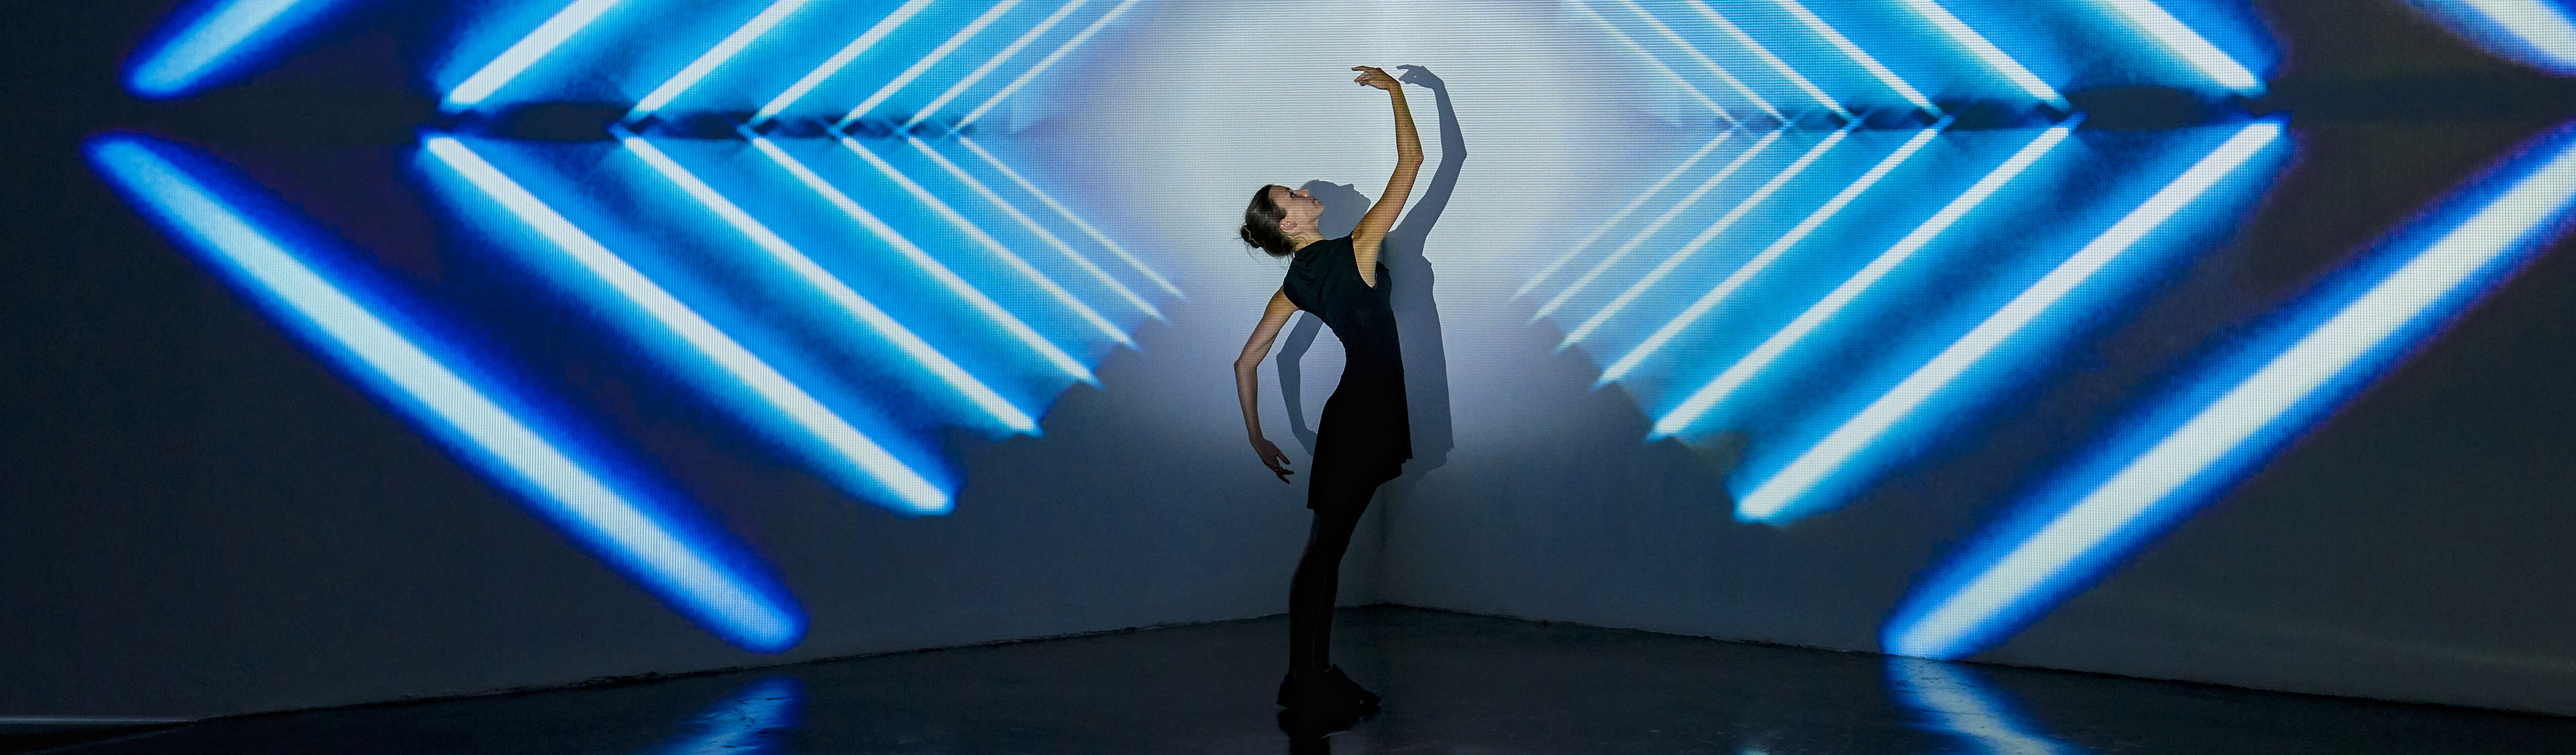 Girl dancing in a studio with graphic patterns projected onto wall behind her